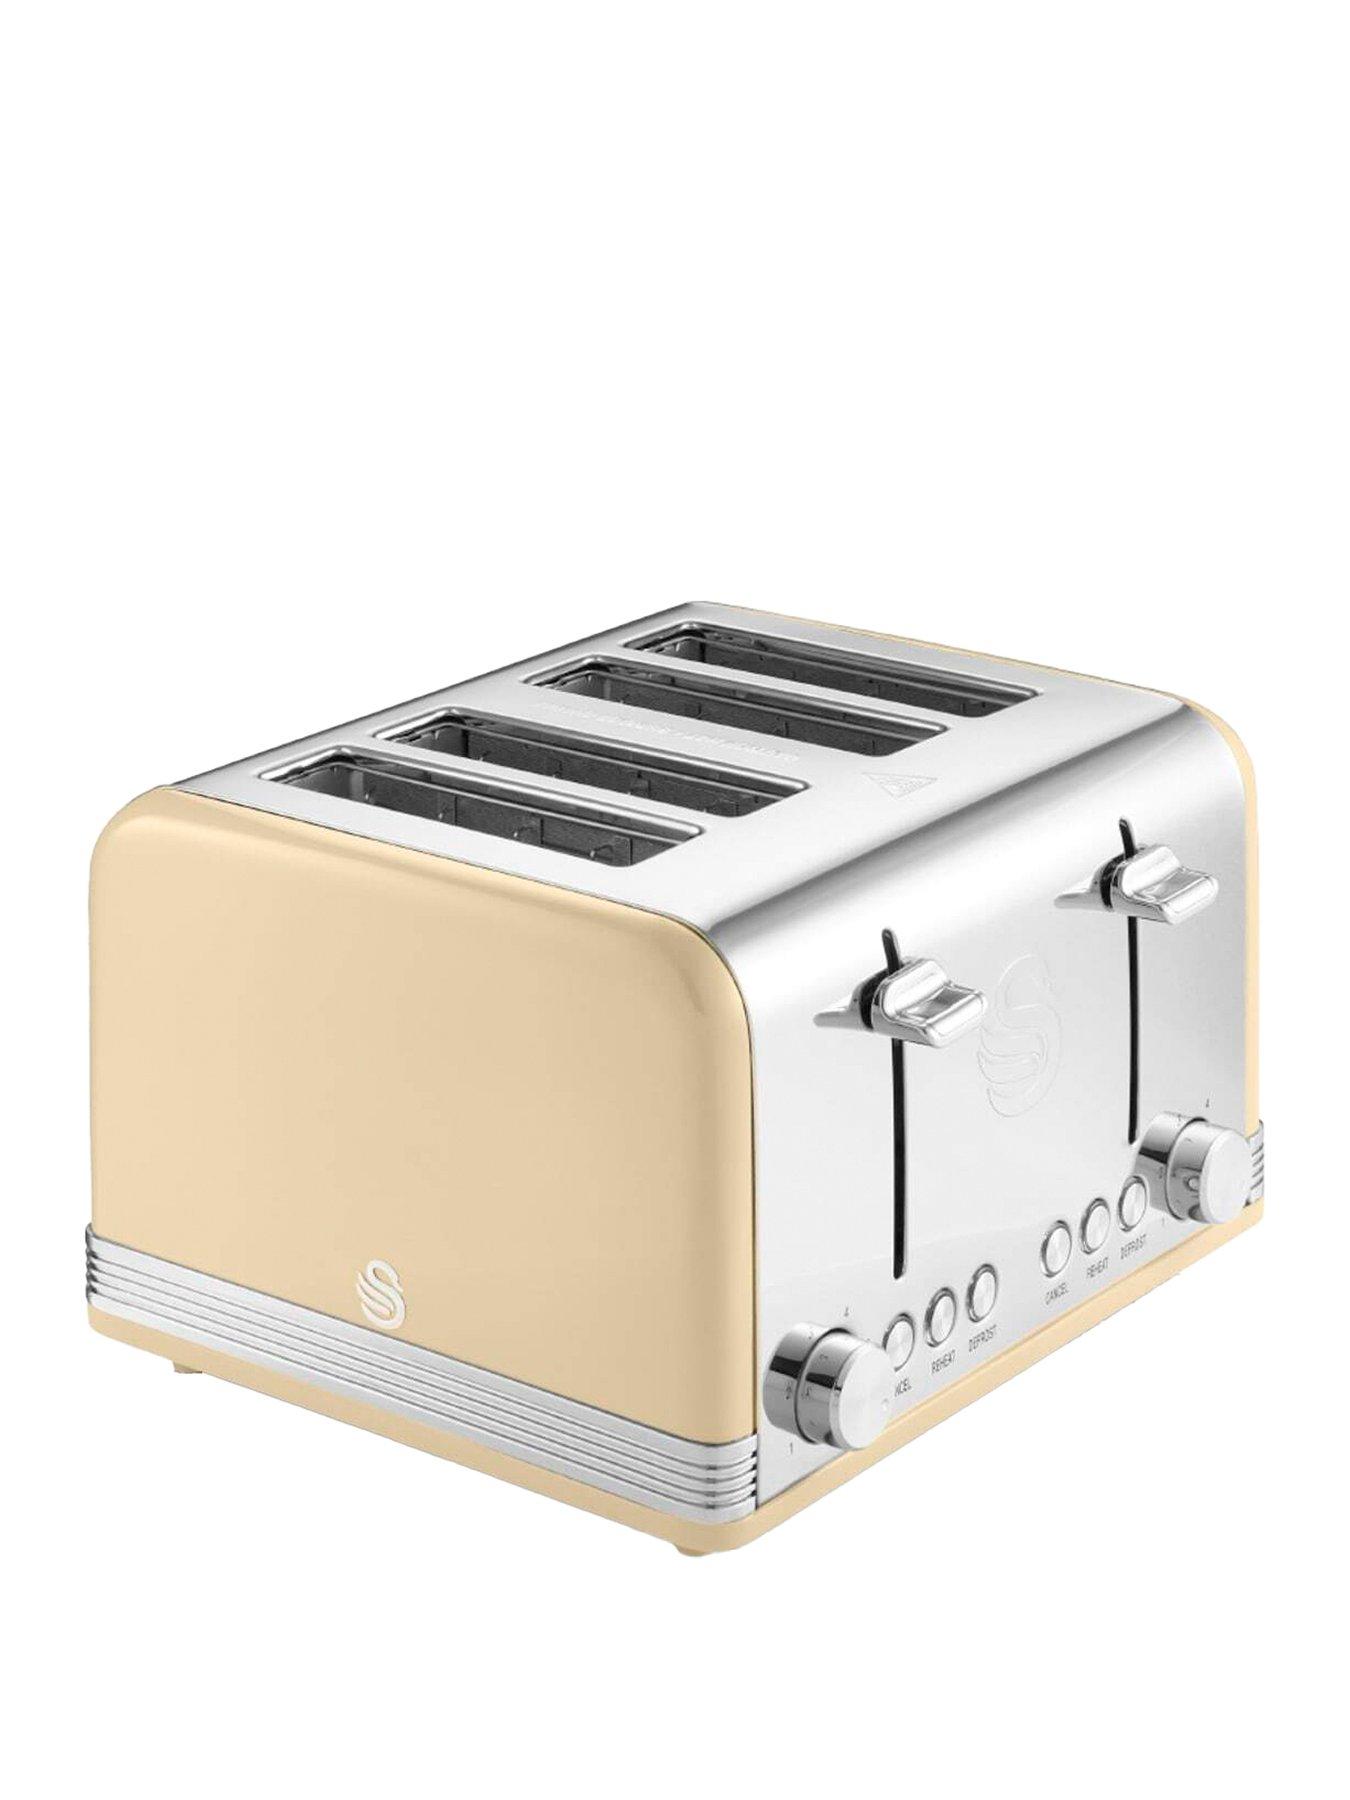 Swan St19020Cn Retro 4-Slice Toaster With Defrost/Reheat/Cancel Functions, Cord Storage, 1600W, Cream